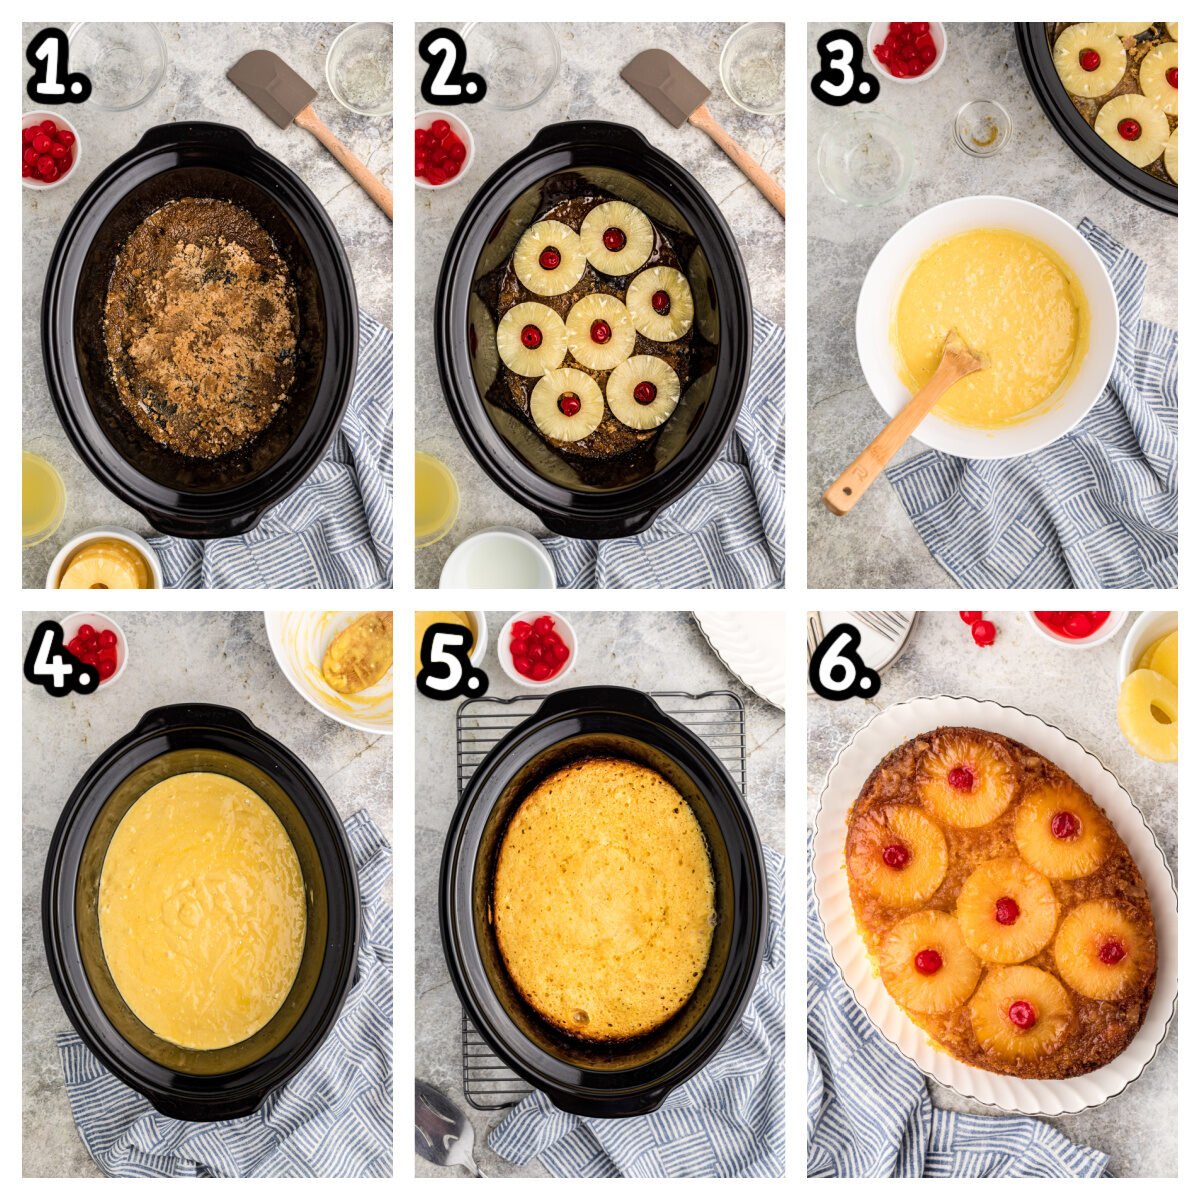 Six images showing how to make pineapple upside down cake in a crockpot.